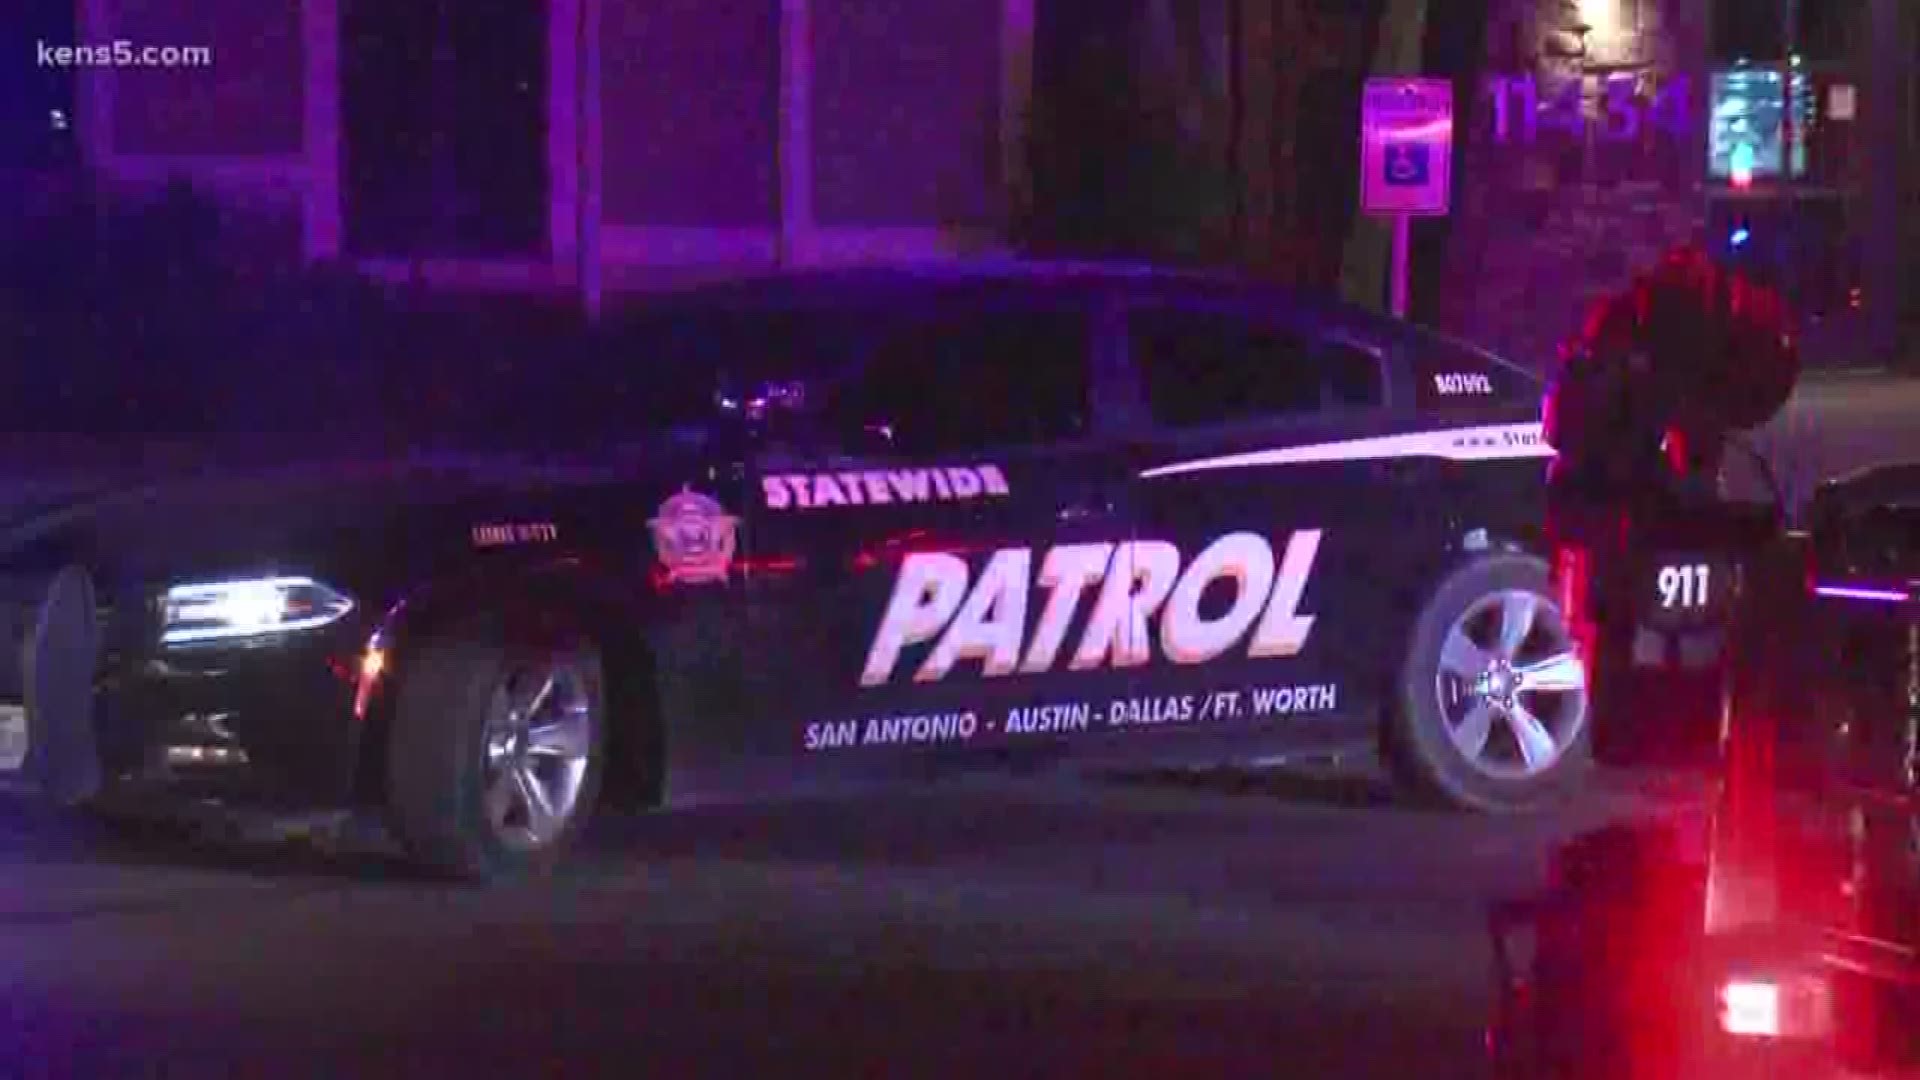 The man who was shot three times by a state patrol security guard following a confrontation at an apartment pool on the west side Thursday night has died, according to the Bexar County Sheriff's Office.